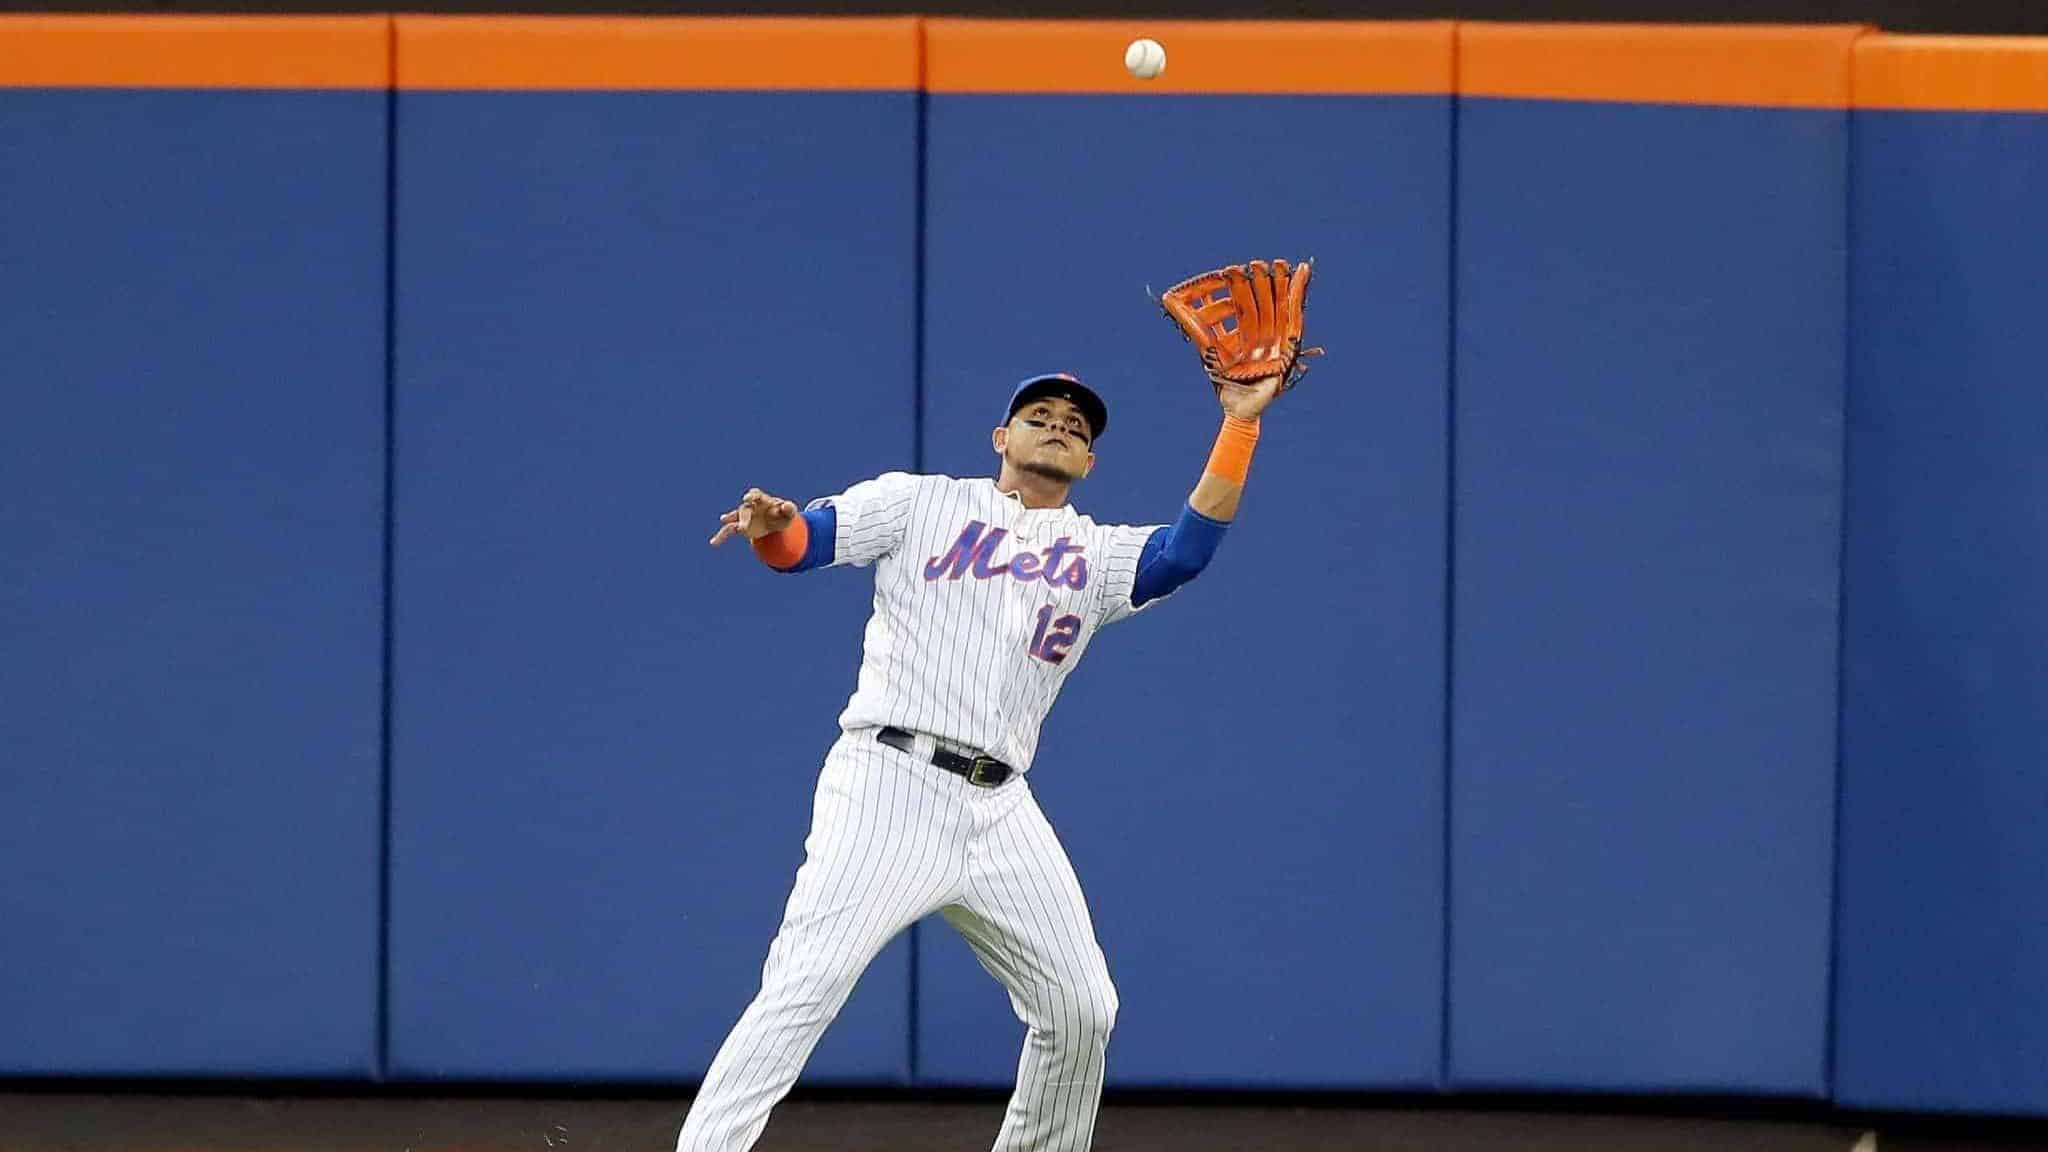 NEW YORK, NEW YORK - AUGUST 21: Juan Lagares #12 of the New York Mets makes the catch for the out in the first inning against the Cleveland Indians at Citi Field on August 21, 2019 in the Flushing neighborhood of the Queens borough of New York City.